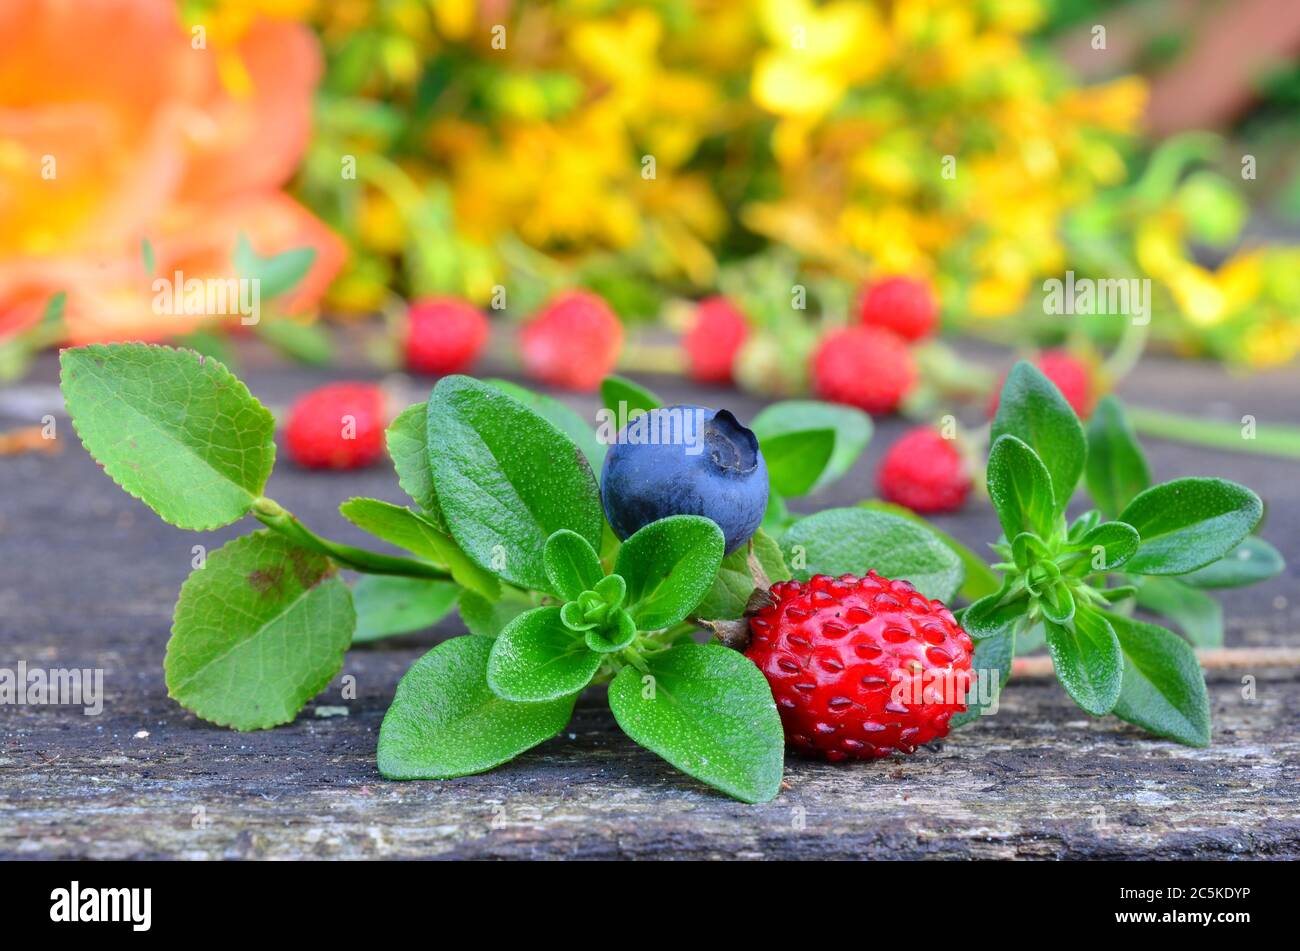 Macro shot of blueberry, wild strawberry and wild thyme in foreground and St.John's worth in background Stock Photo